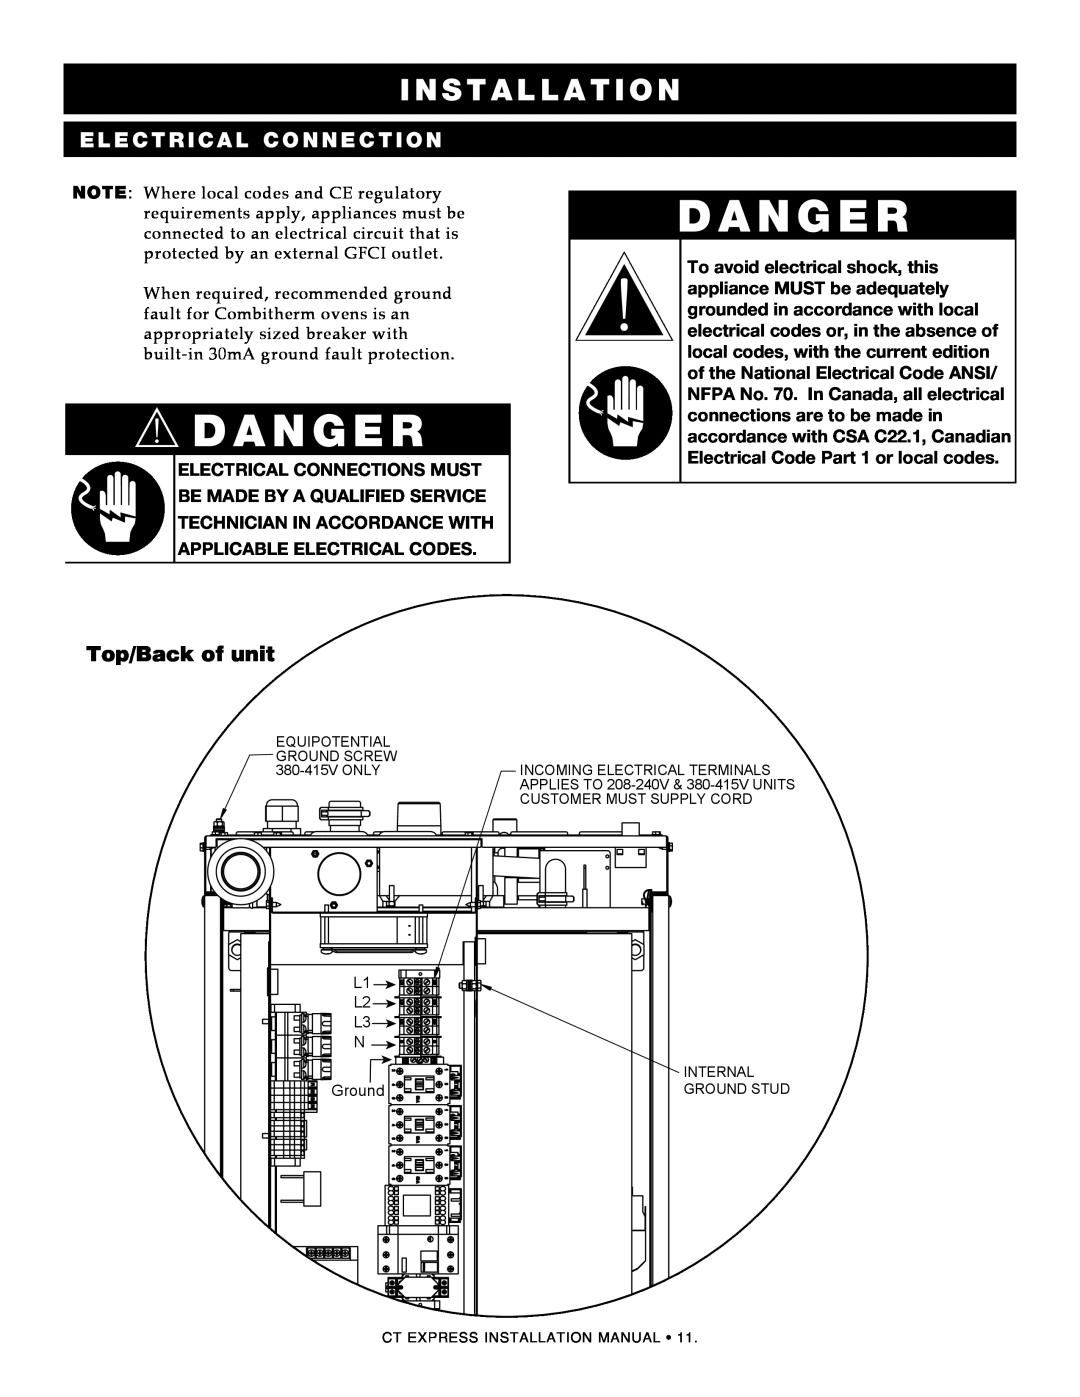 Alto-Shaam 4.10esi, 4.10ESiVH manual danger, i n s t a l l a t i o n, electrical connection, Top/Back of unit 